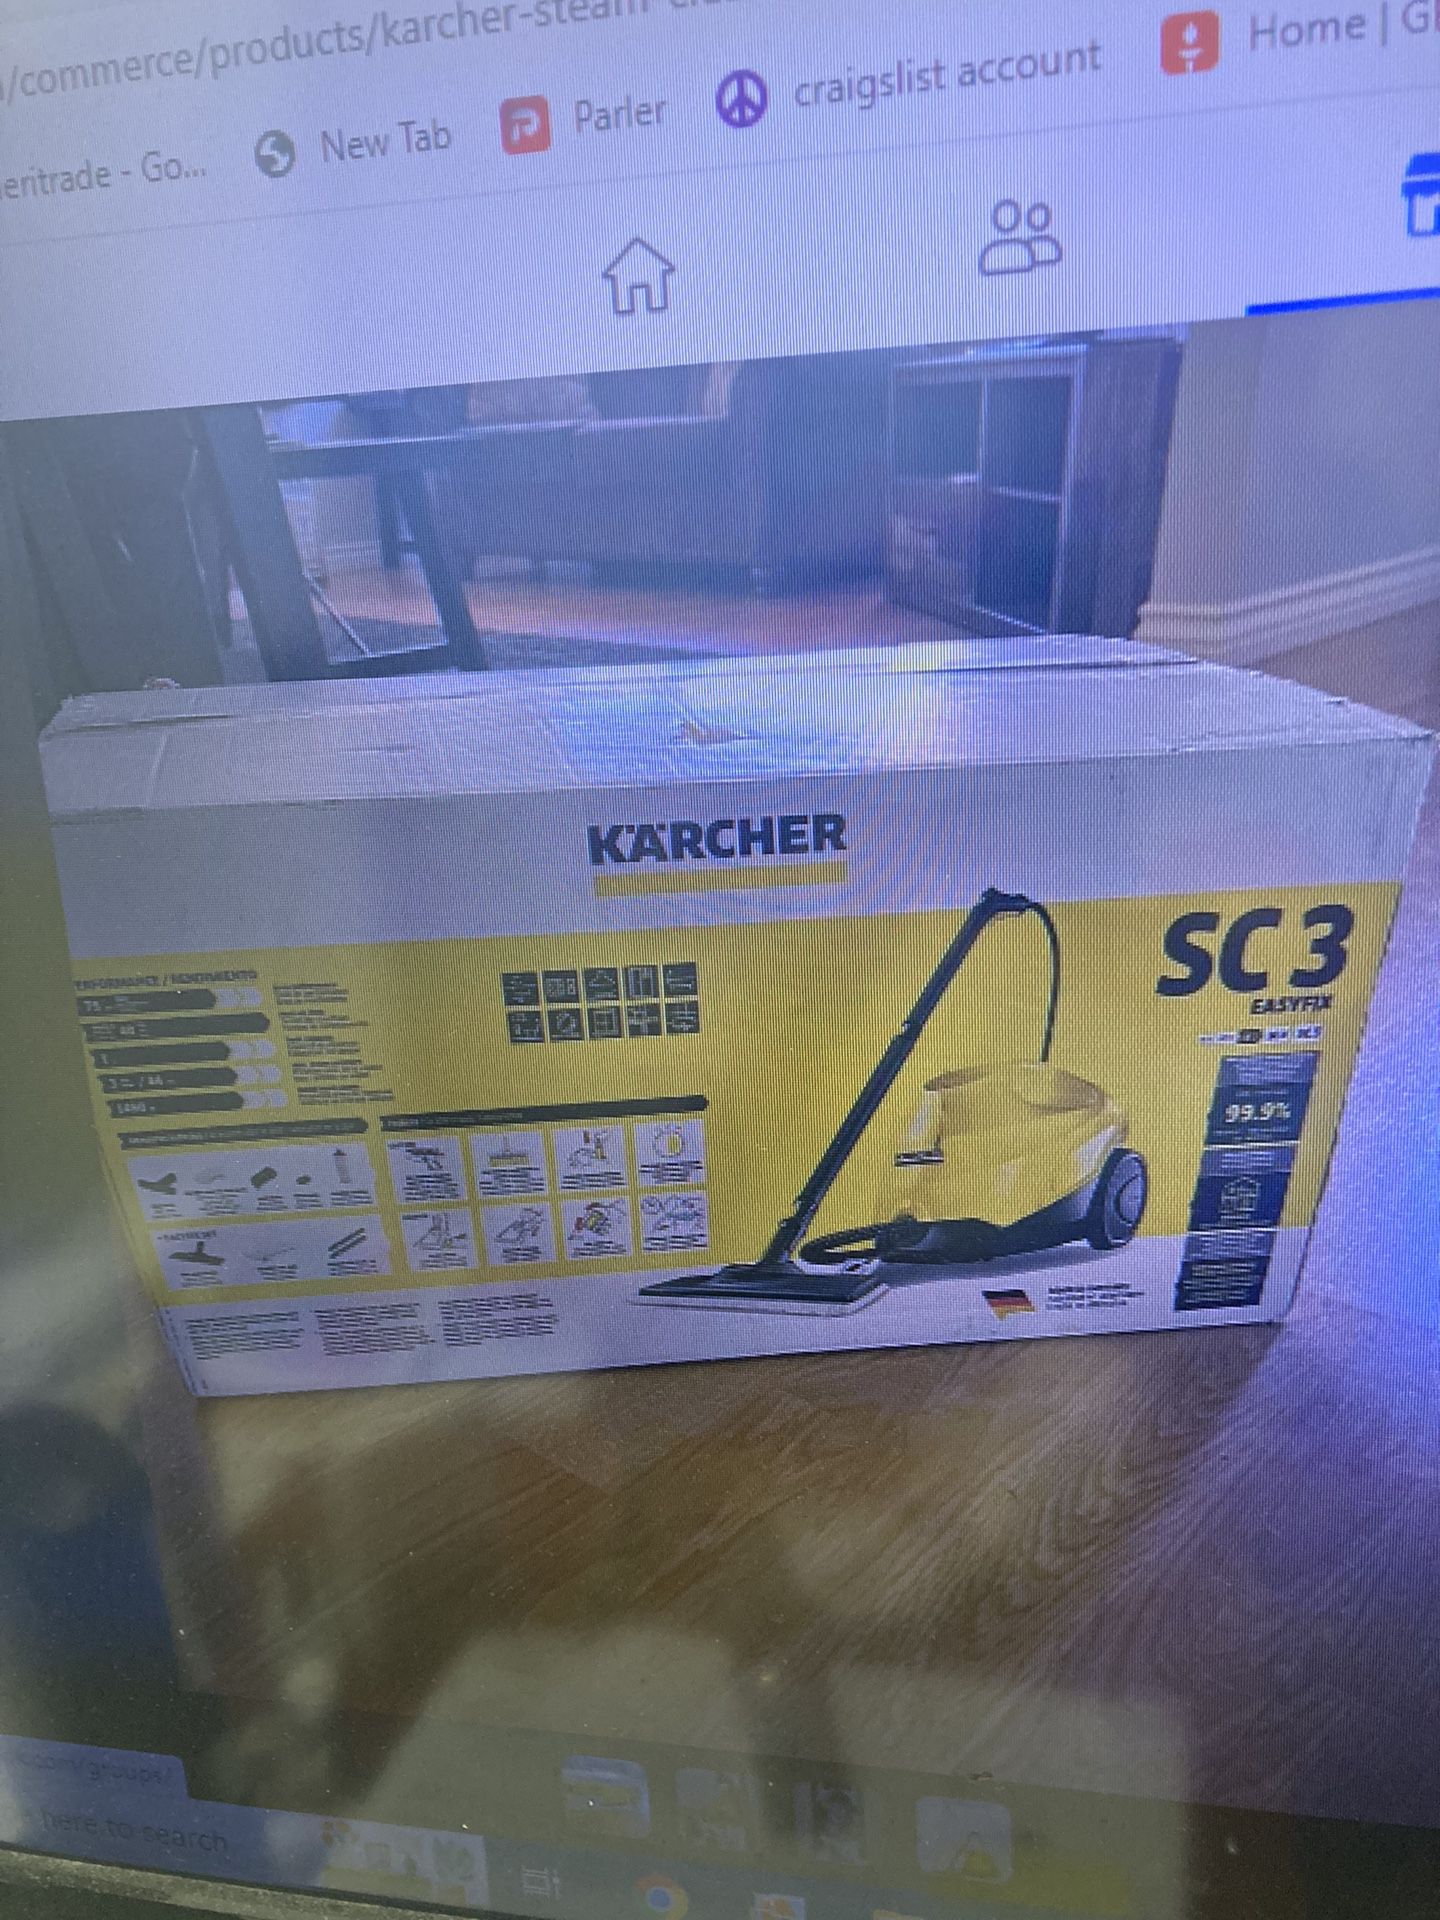 Save Lots Of Money On This Display Model !! Karcher Steam cleaner Model # SCR